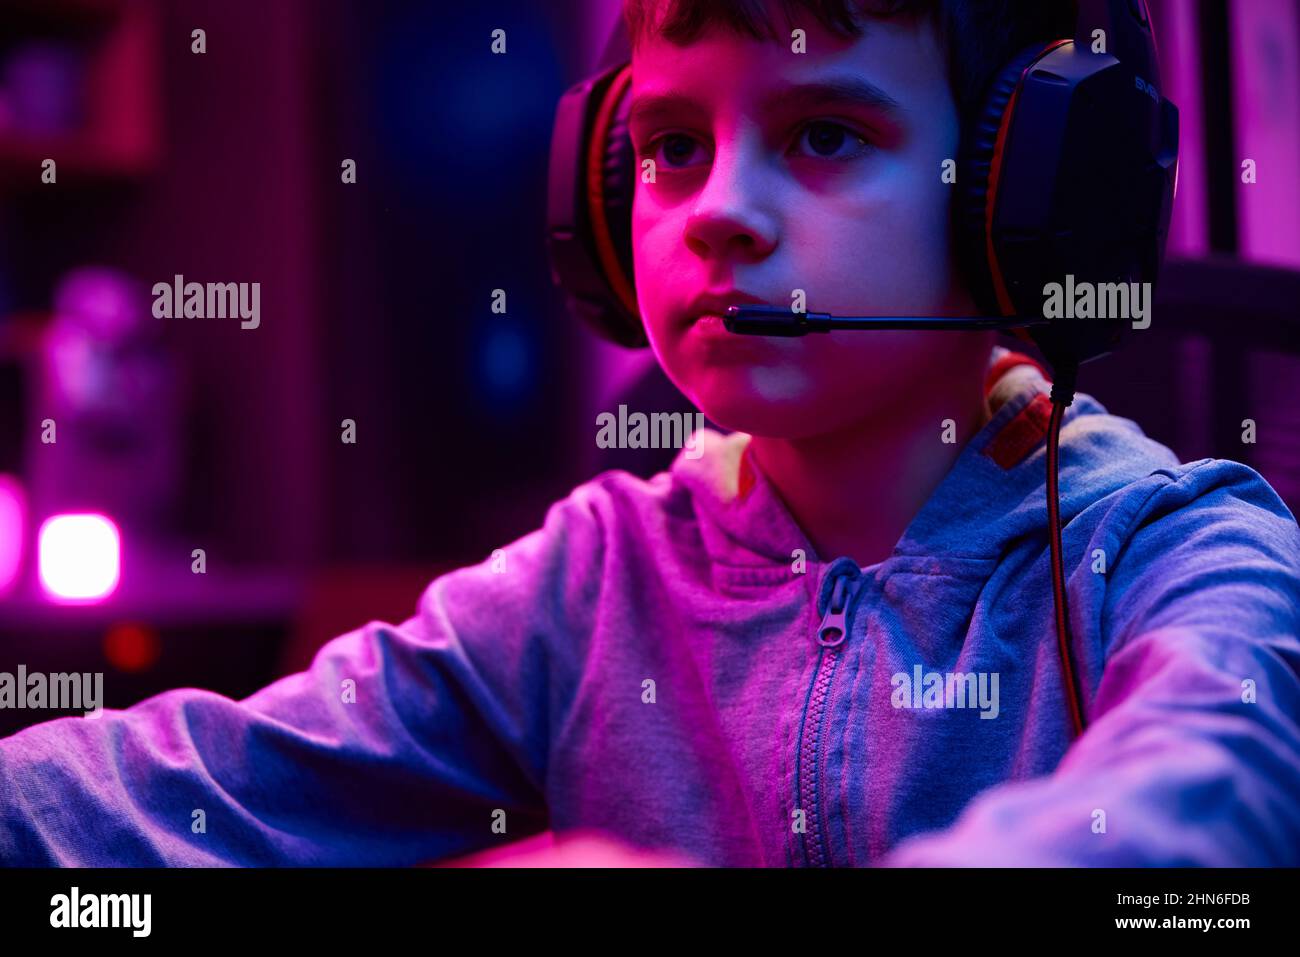 Portrait of boy playing computer video game in dark room, workplace for cybersport gaming, children gaming addiction Stock Photo